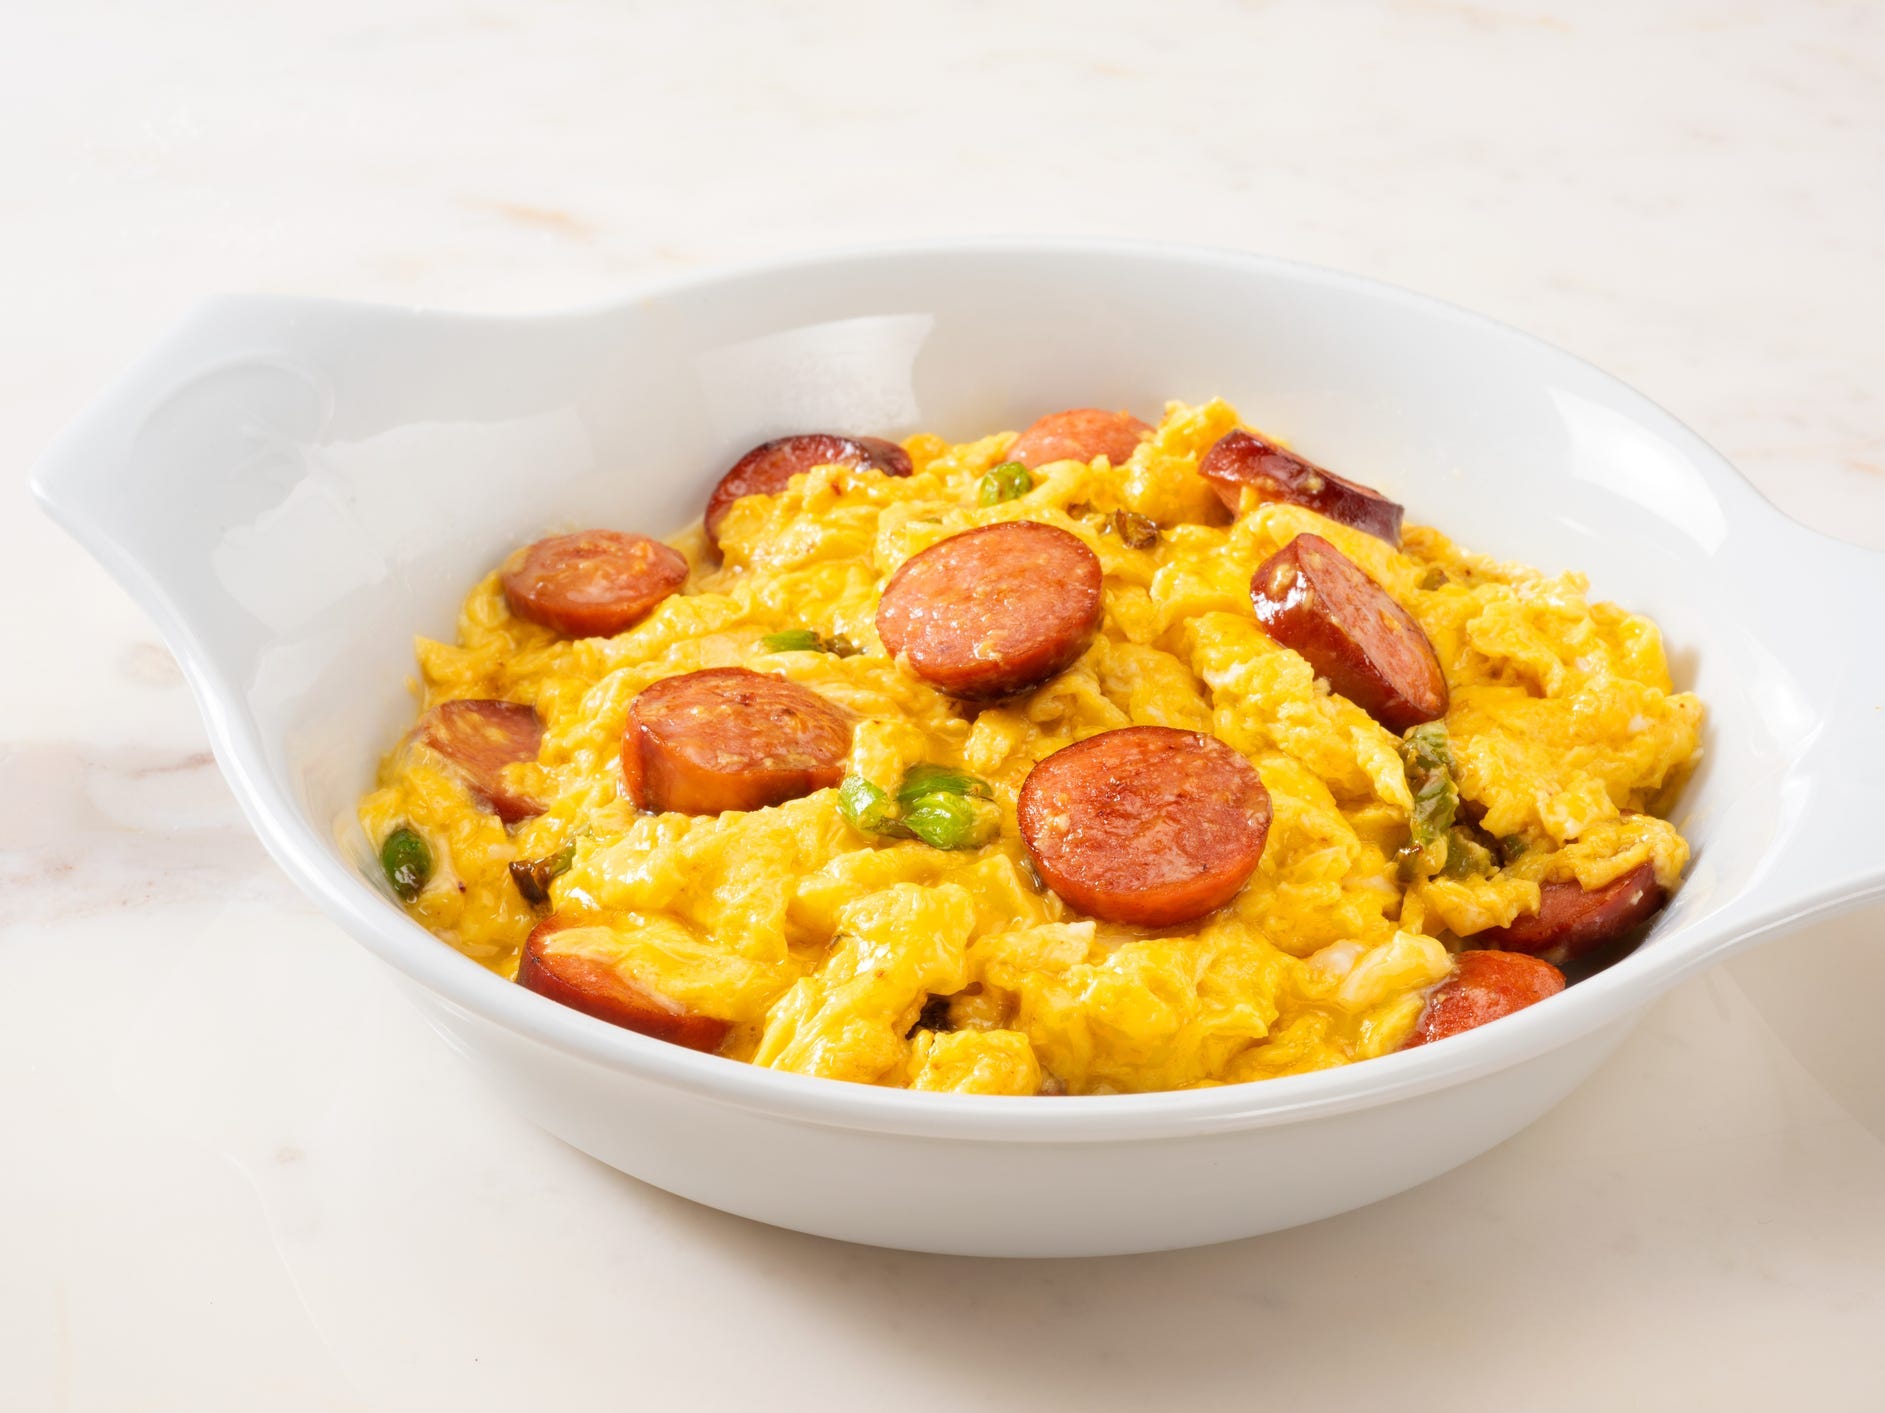 eggs and turkey sausages